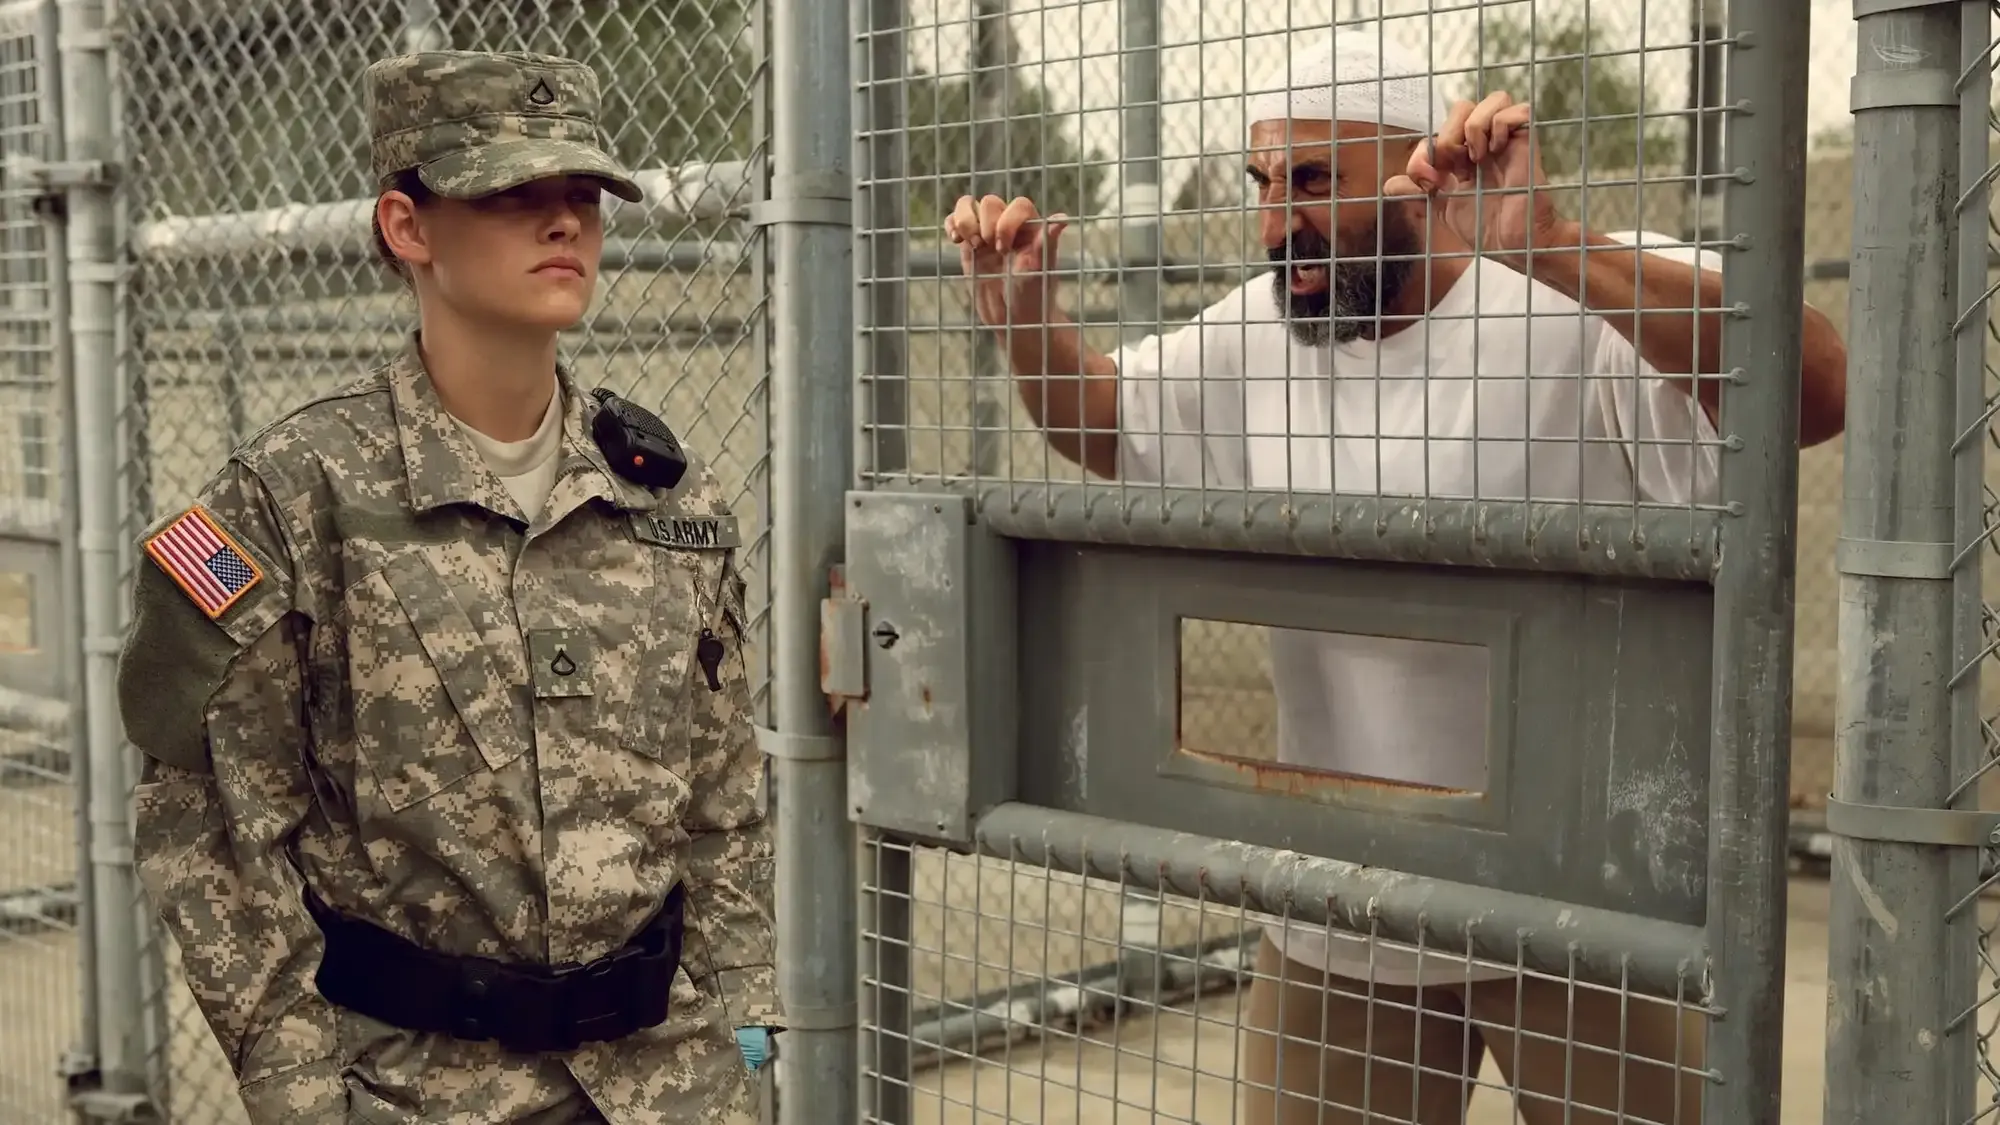 Camp X-Ray movie review